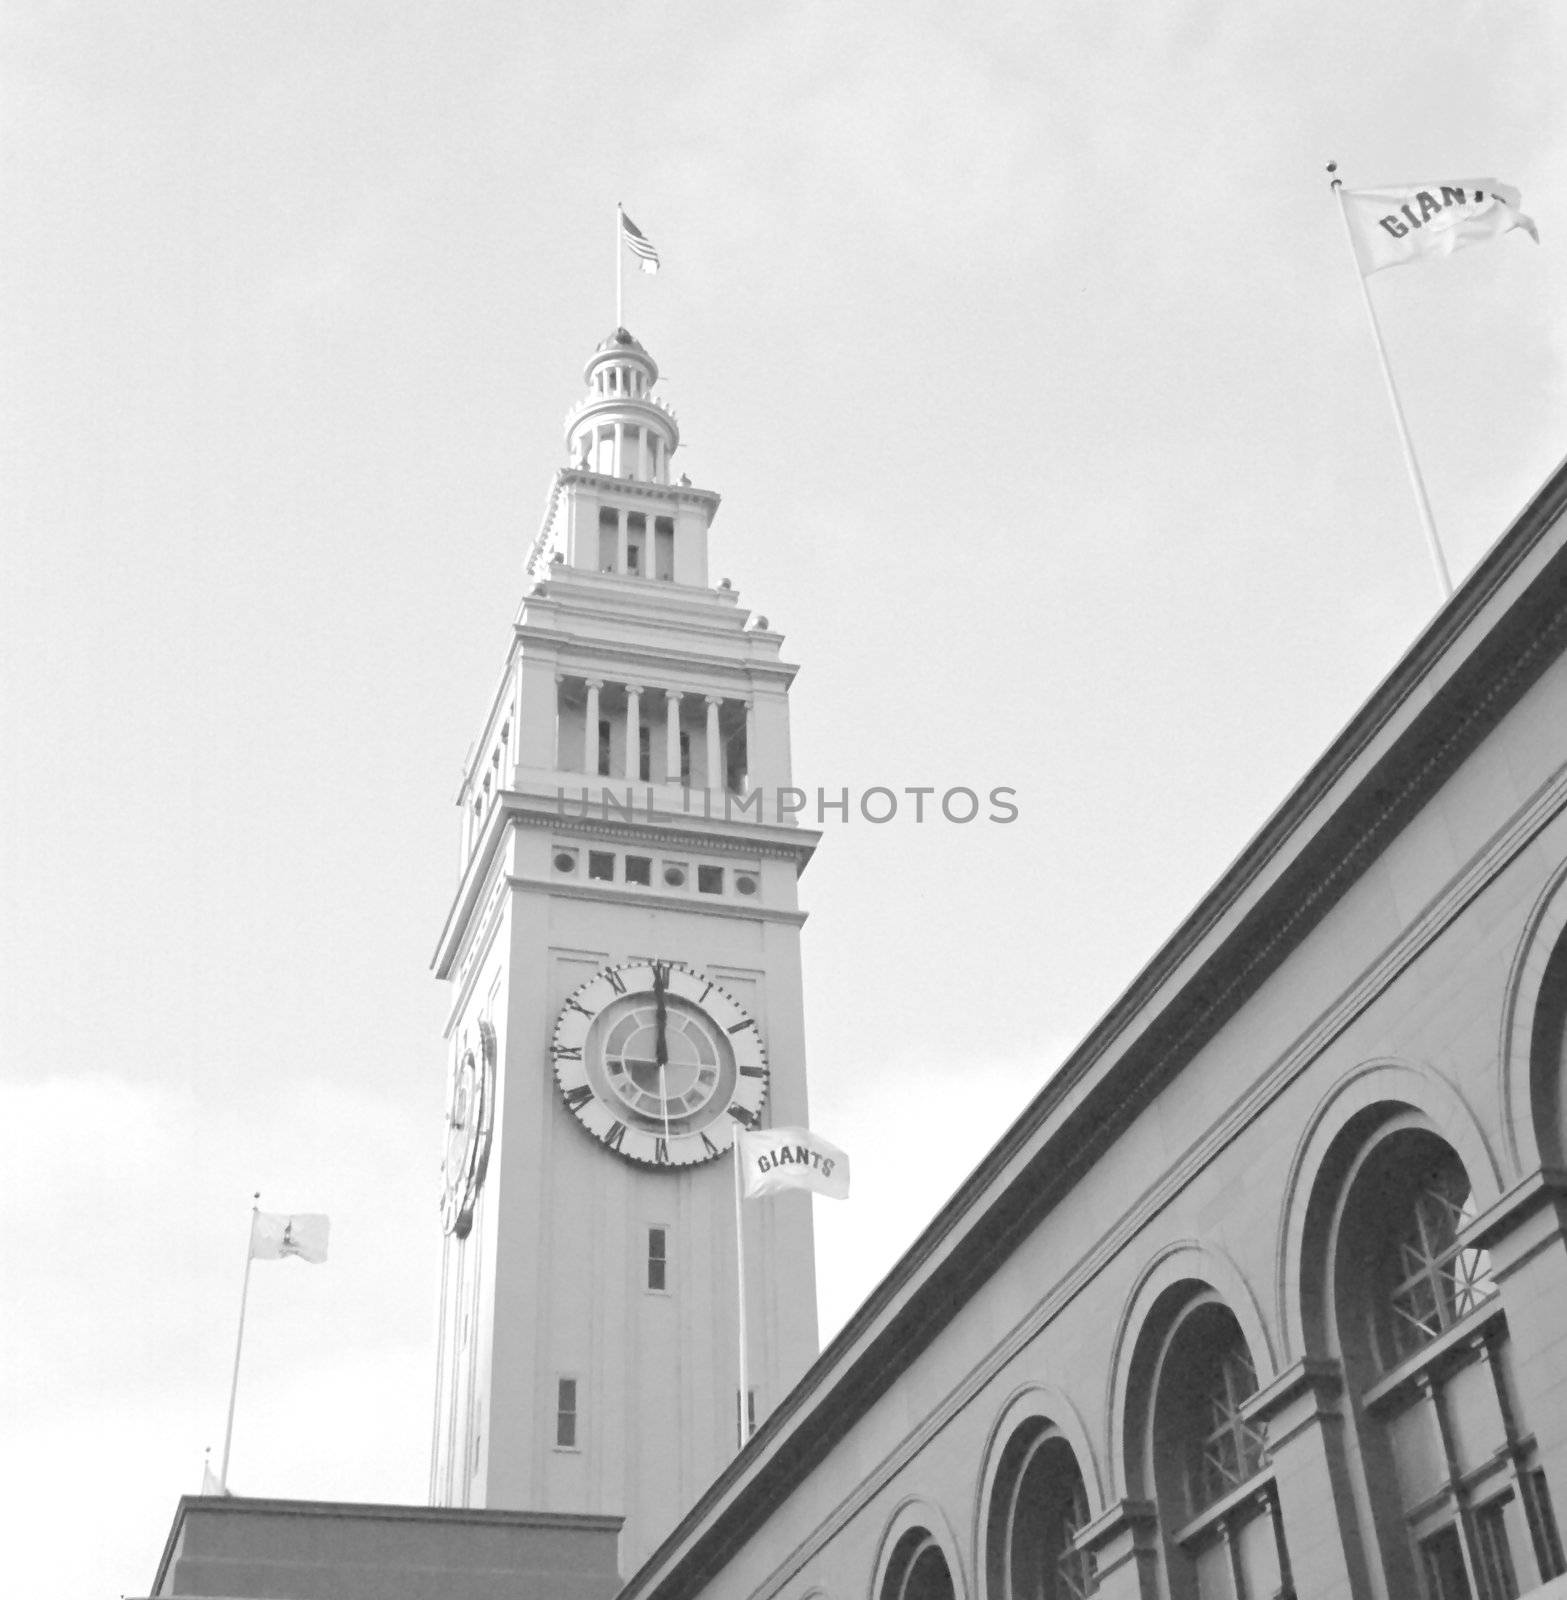 Port of San Francisco by melastmohican